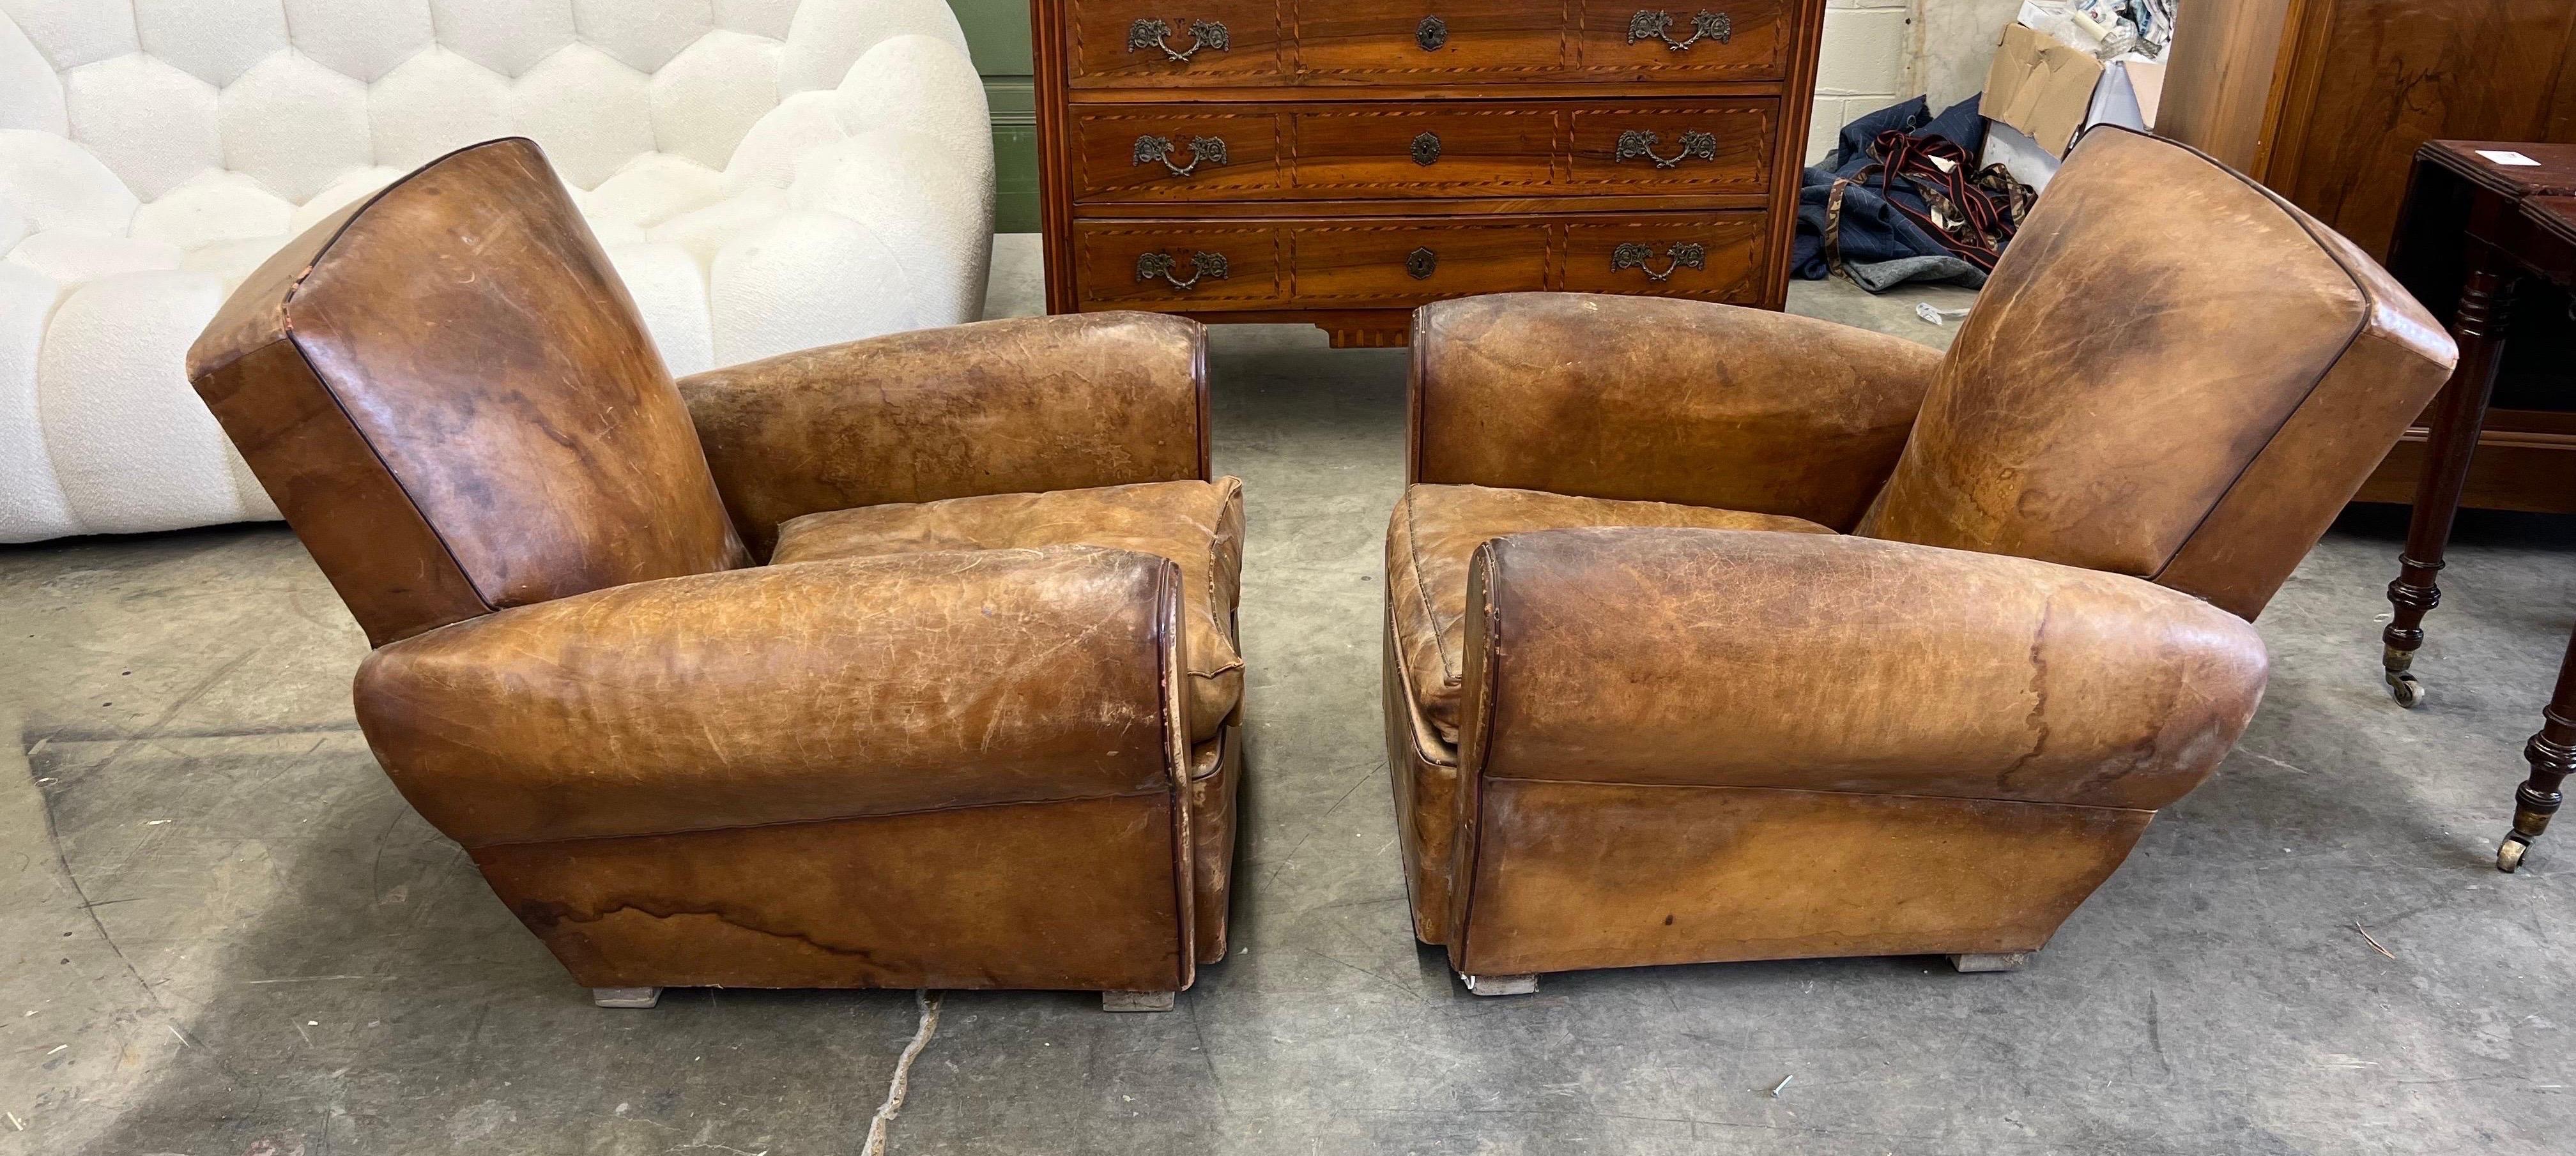 Pair of French Deco Period Leather Club Chairs with Great Patina For Sale 2